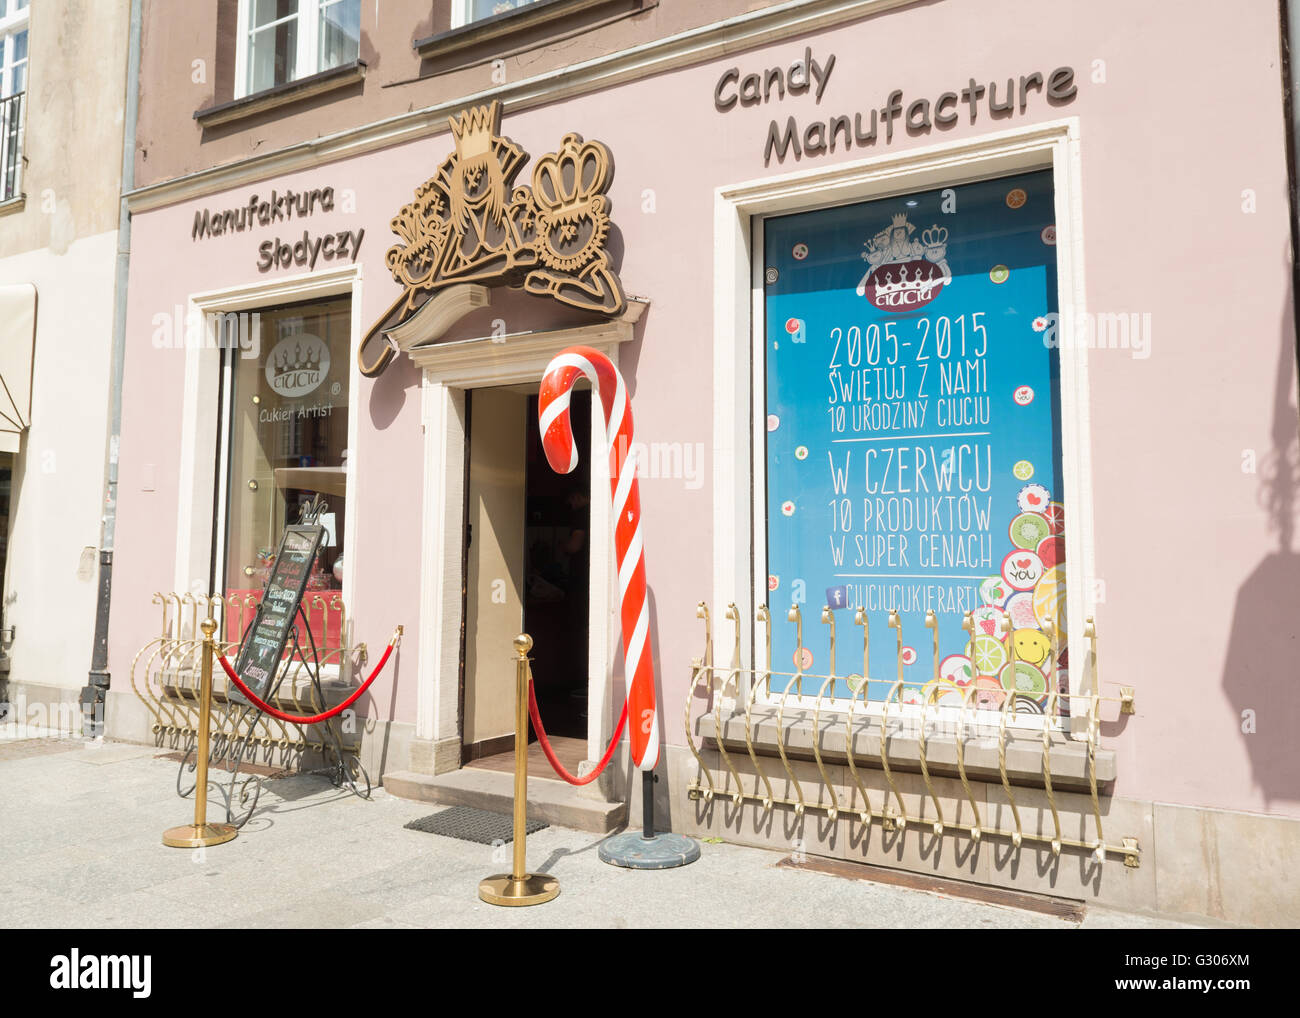 Ciuciu - sweets candy manufacturer in Gdansk, Poland - sweets are produced by hand in front of customers and is a popular attrac Stock Photo